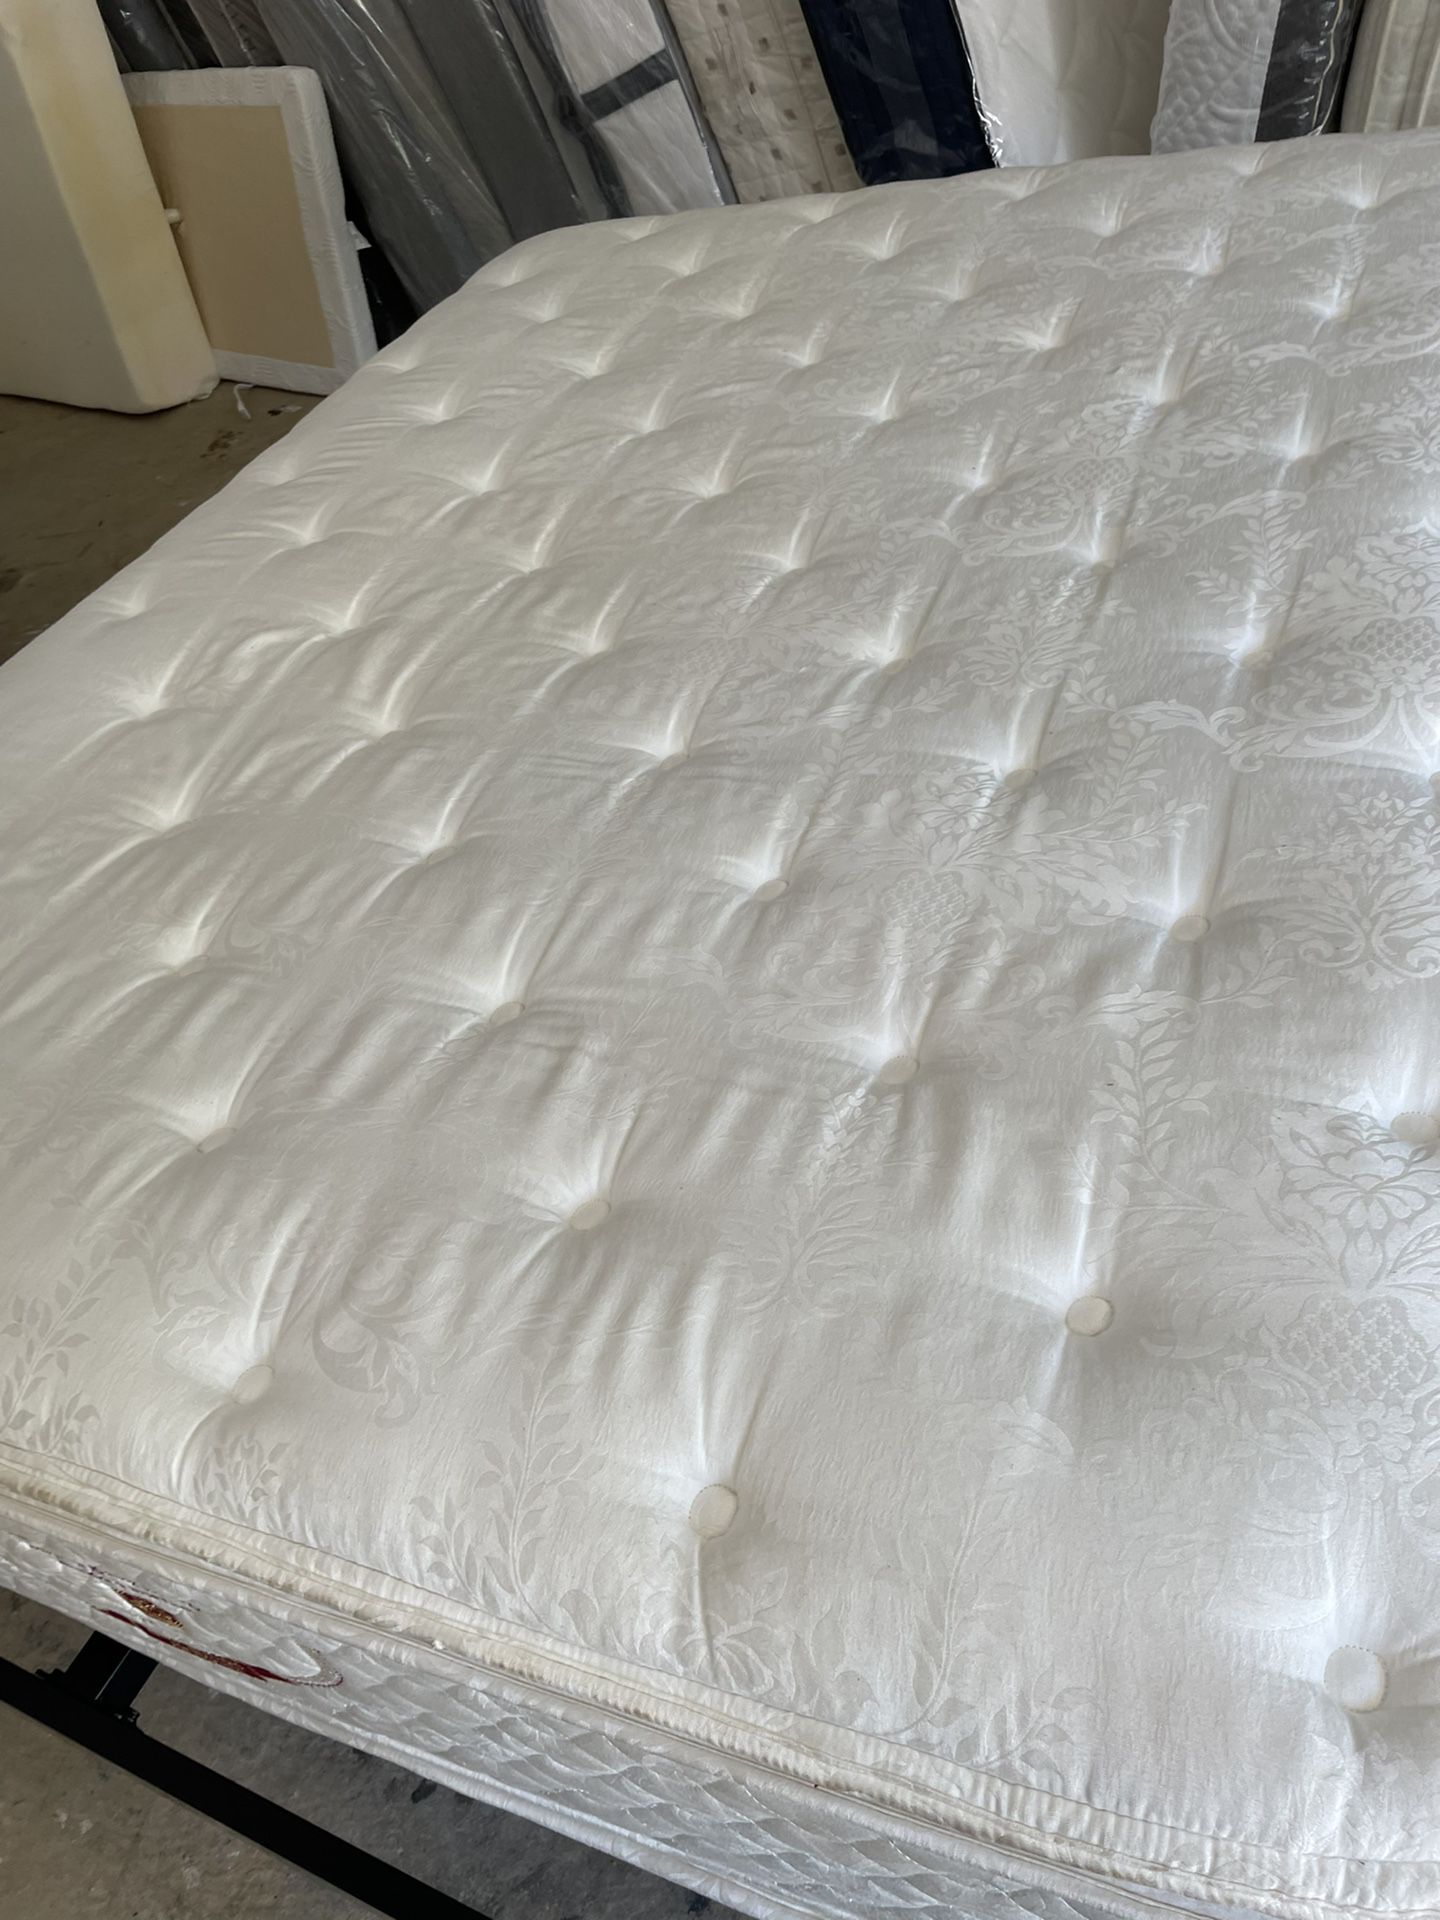 Clean queen size Stearns and Foster double pillow top ...